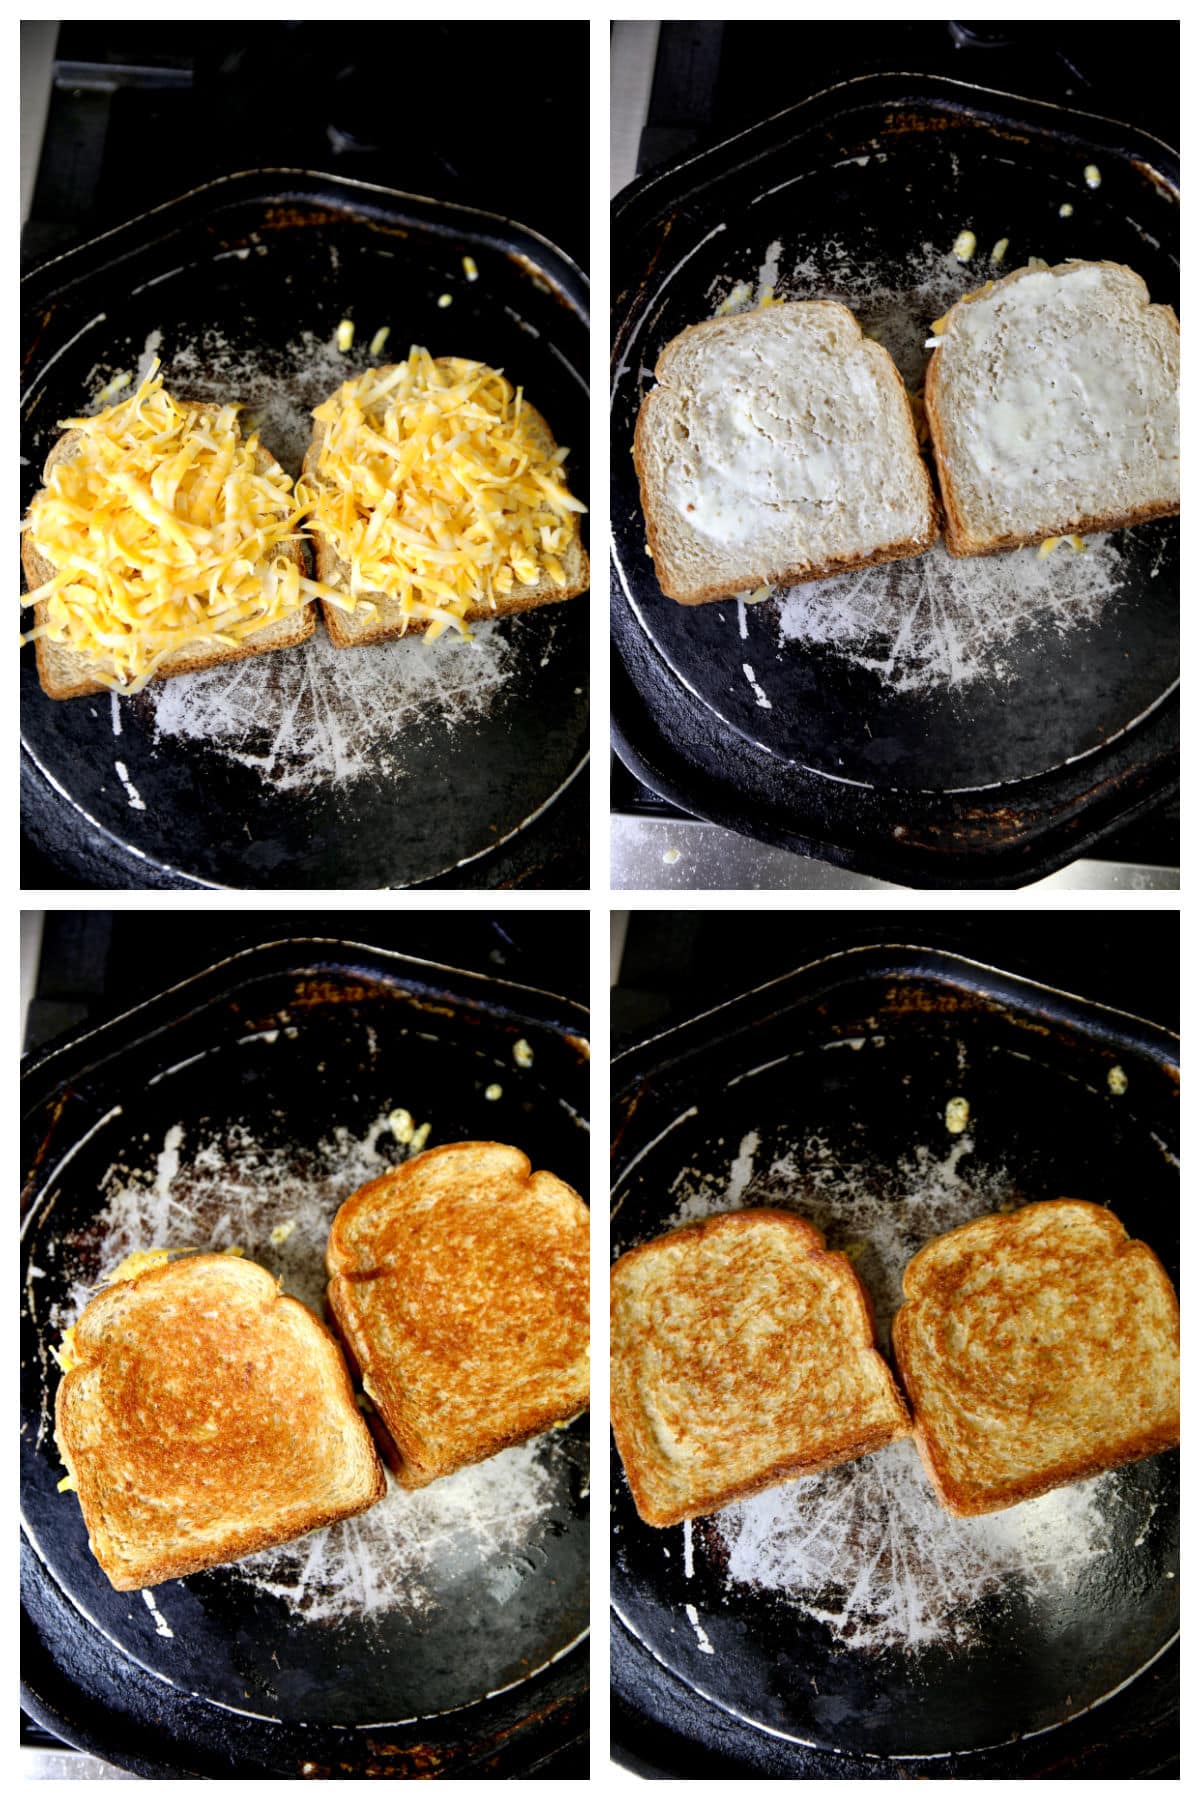 Collage making grilled cheese + 2 slices toasted bread.